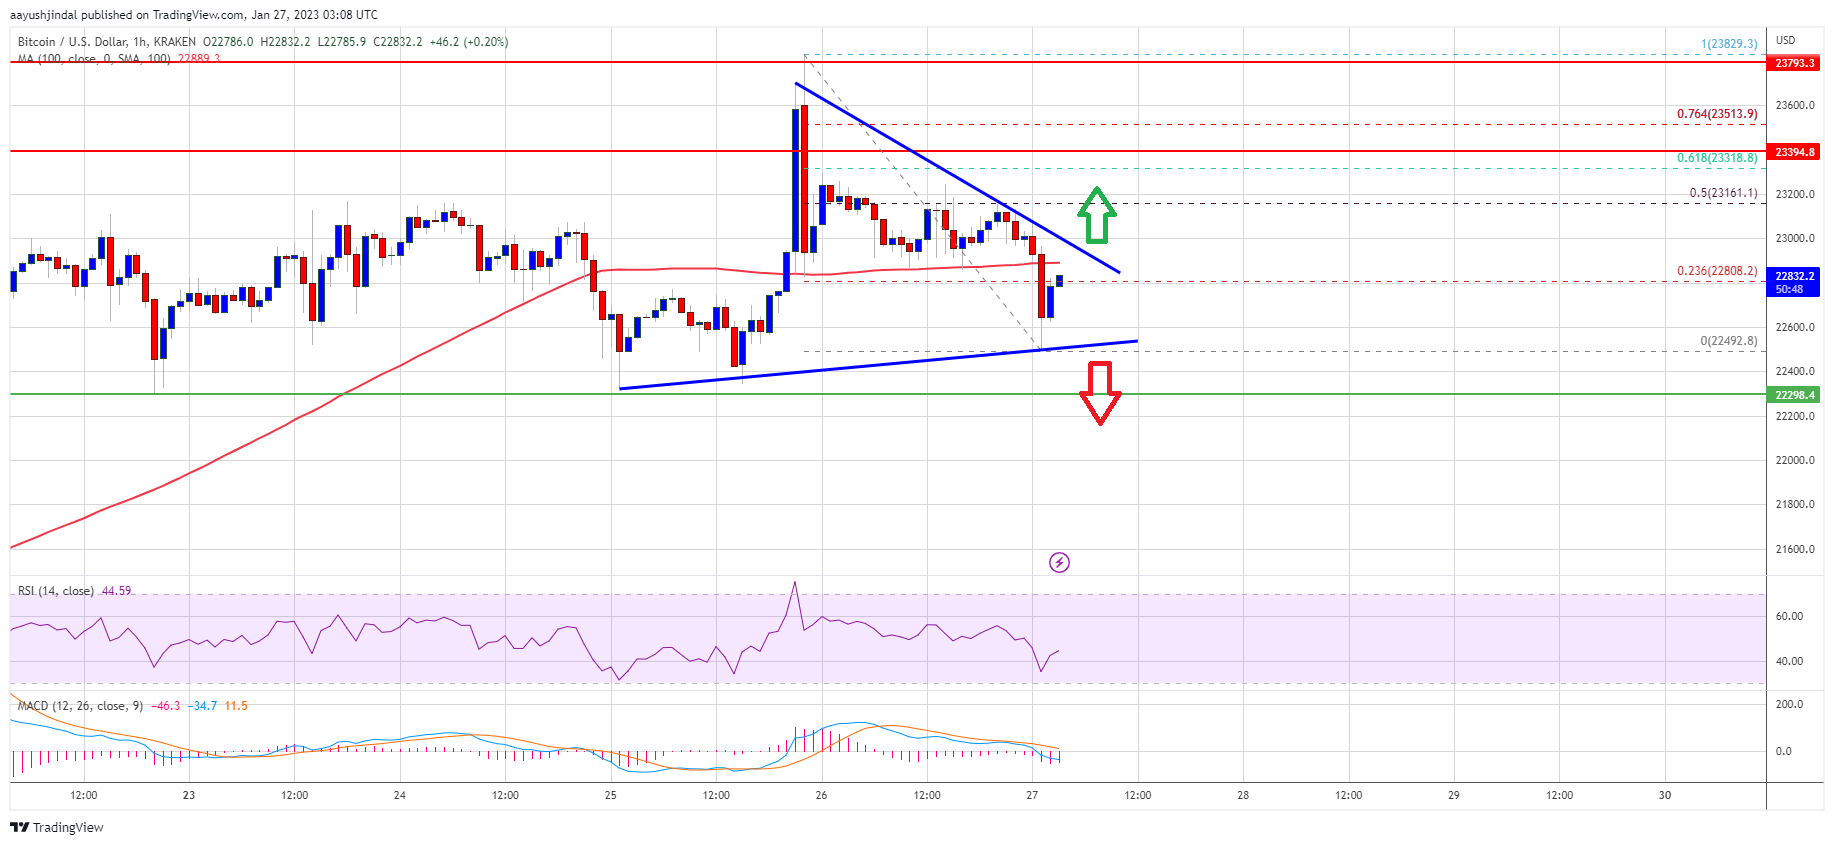 Bitcoin Price Holds Key Support